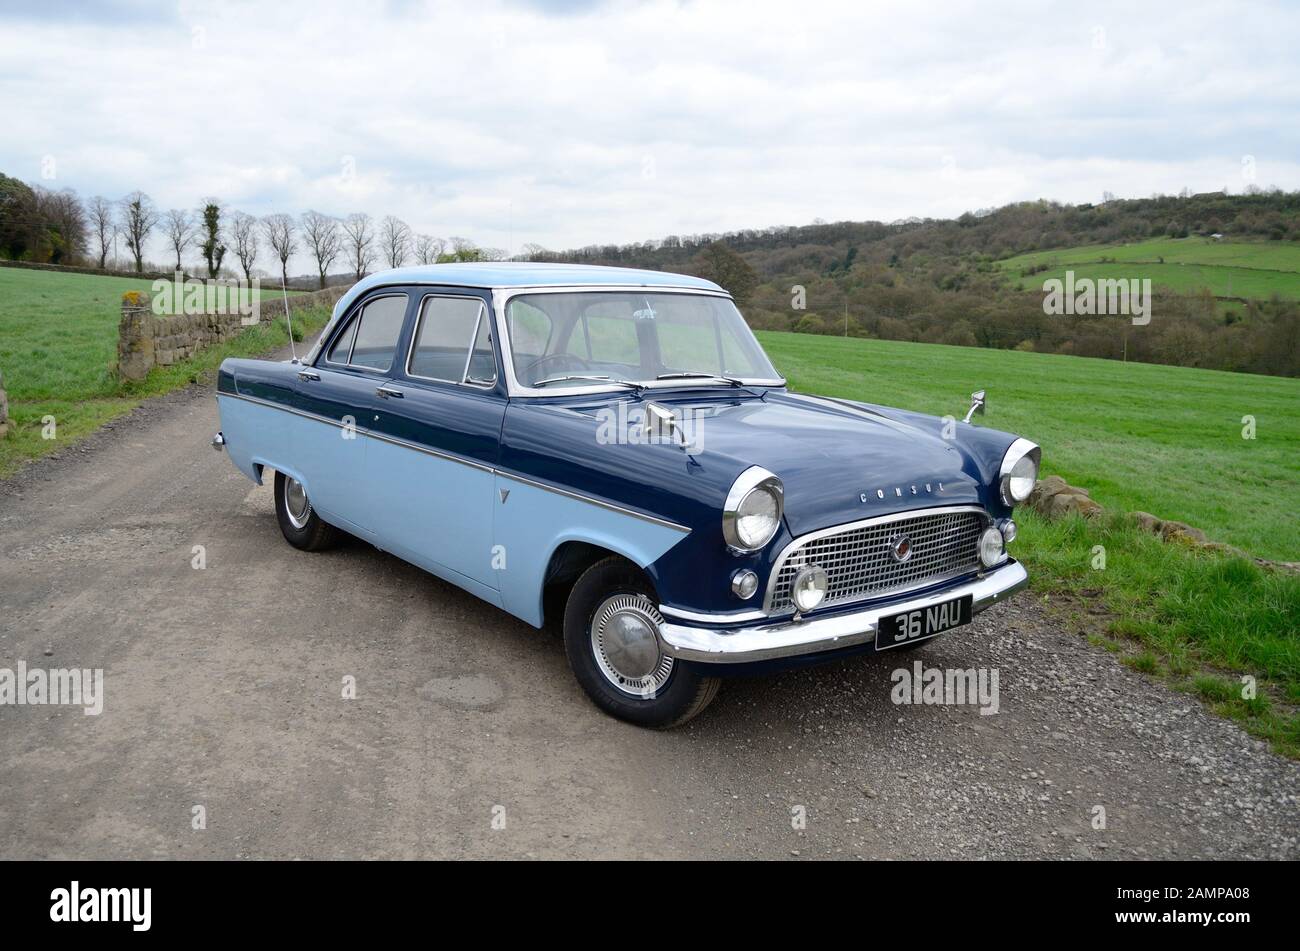 Vauxhall Cresta parked on a country lane in Winter Stock Photo